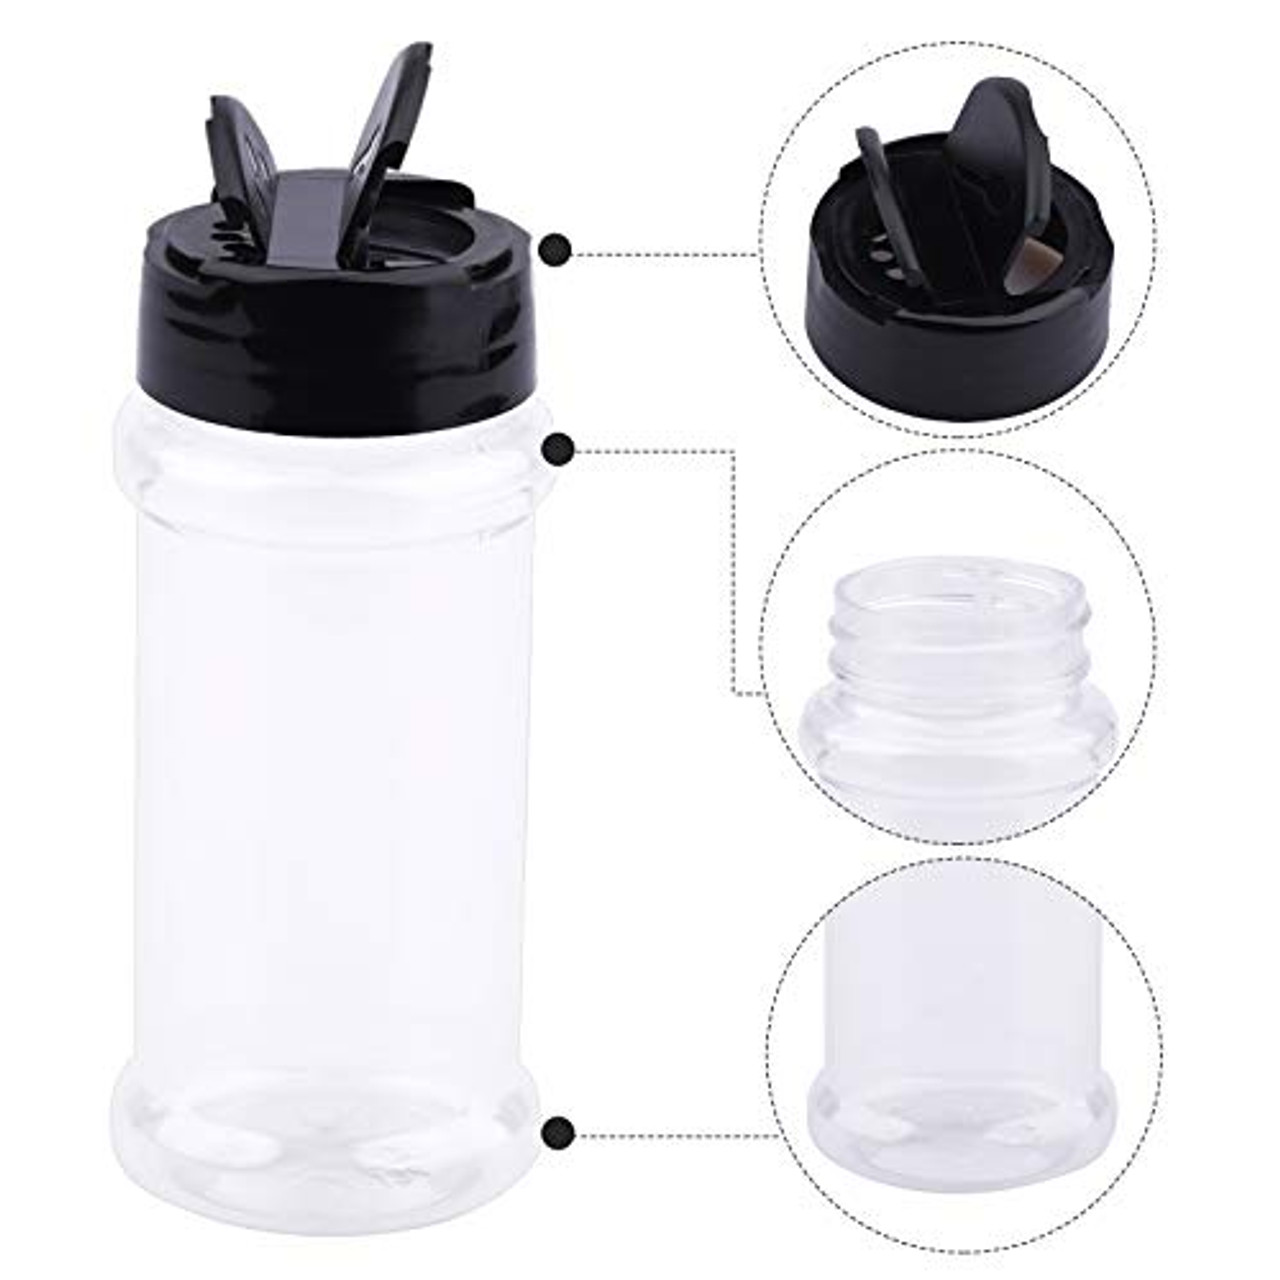 RoyalHouse - 6 Pack 14 Oz Plastic Spice Jars with Black Cap, Clear and Safe  Plastic Bottle Containers with Shaker Lids for Storing Spice, Herbs and